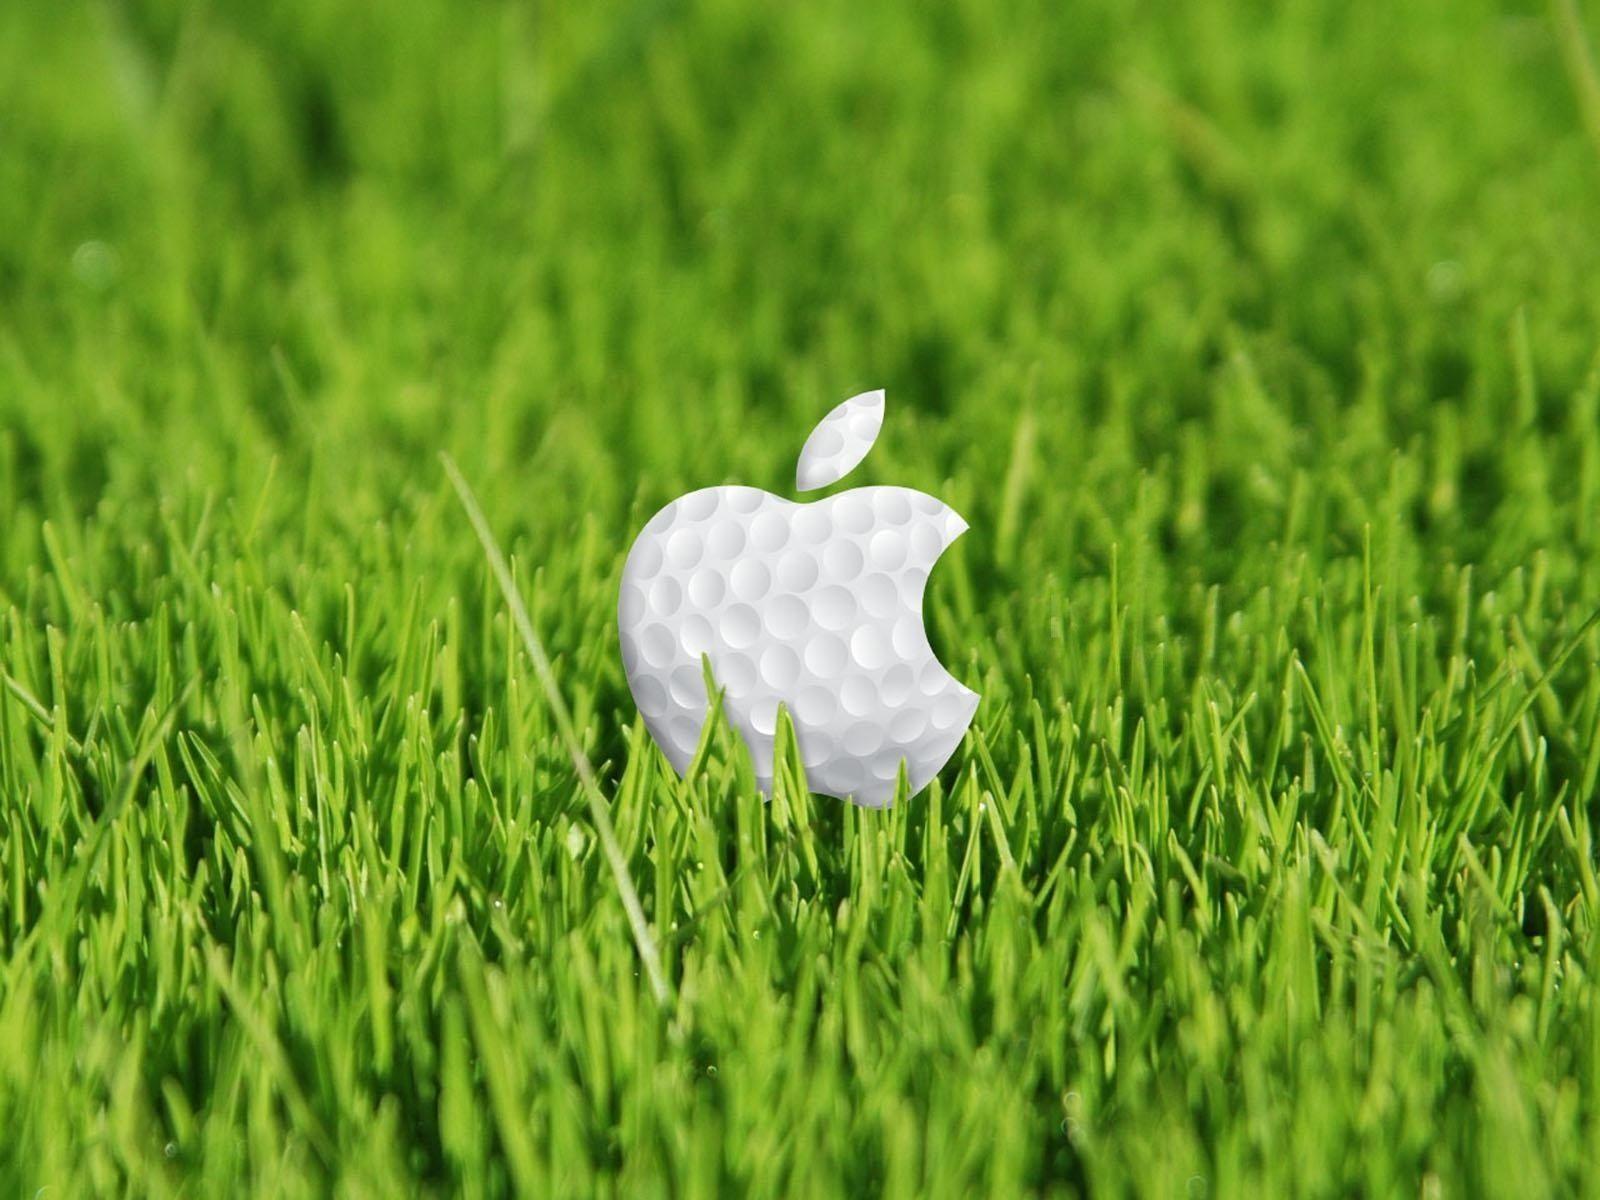 Apple Golf Ball on Grass Free and Wallpaper